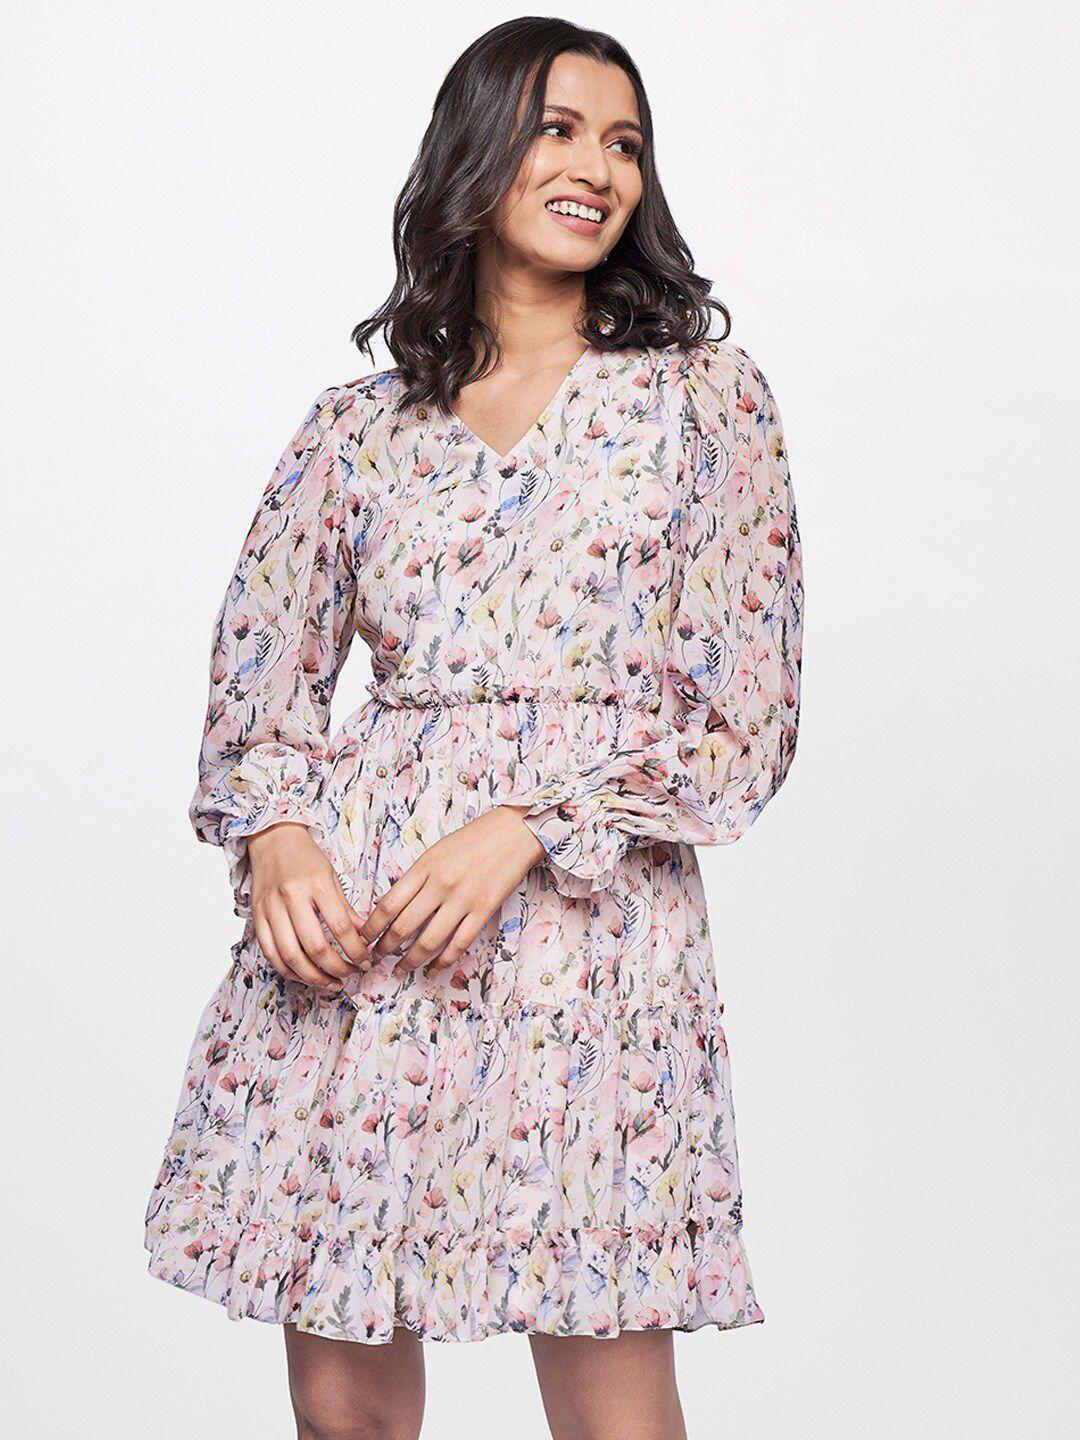 and women beige floral printed dress